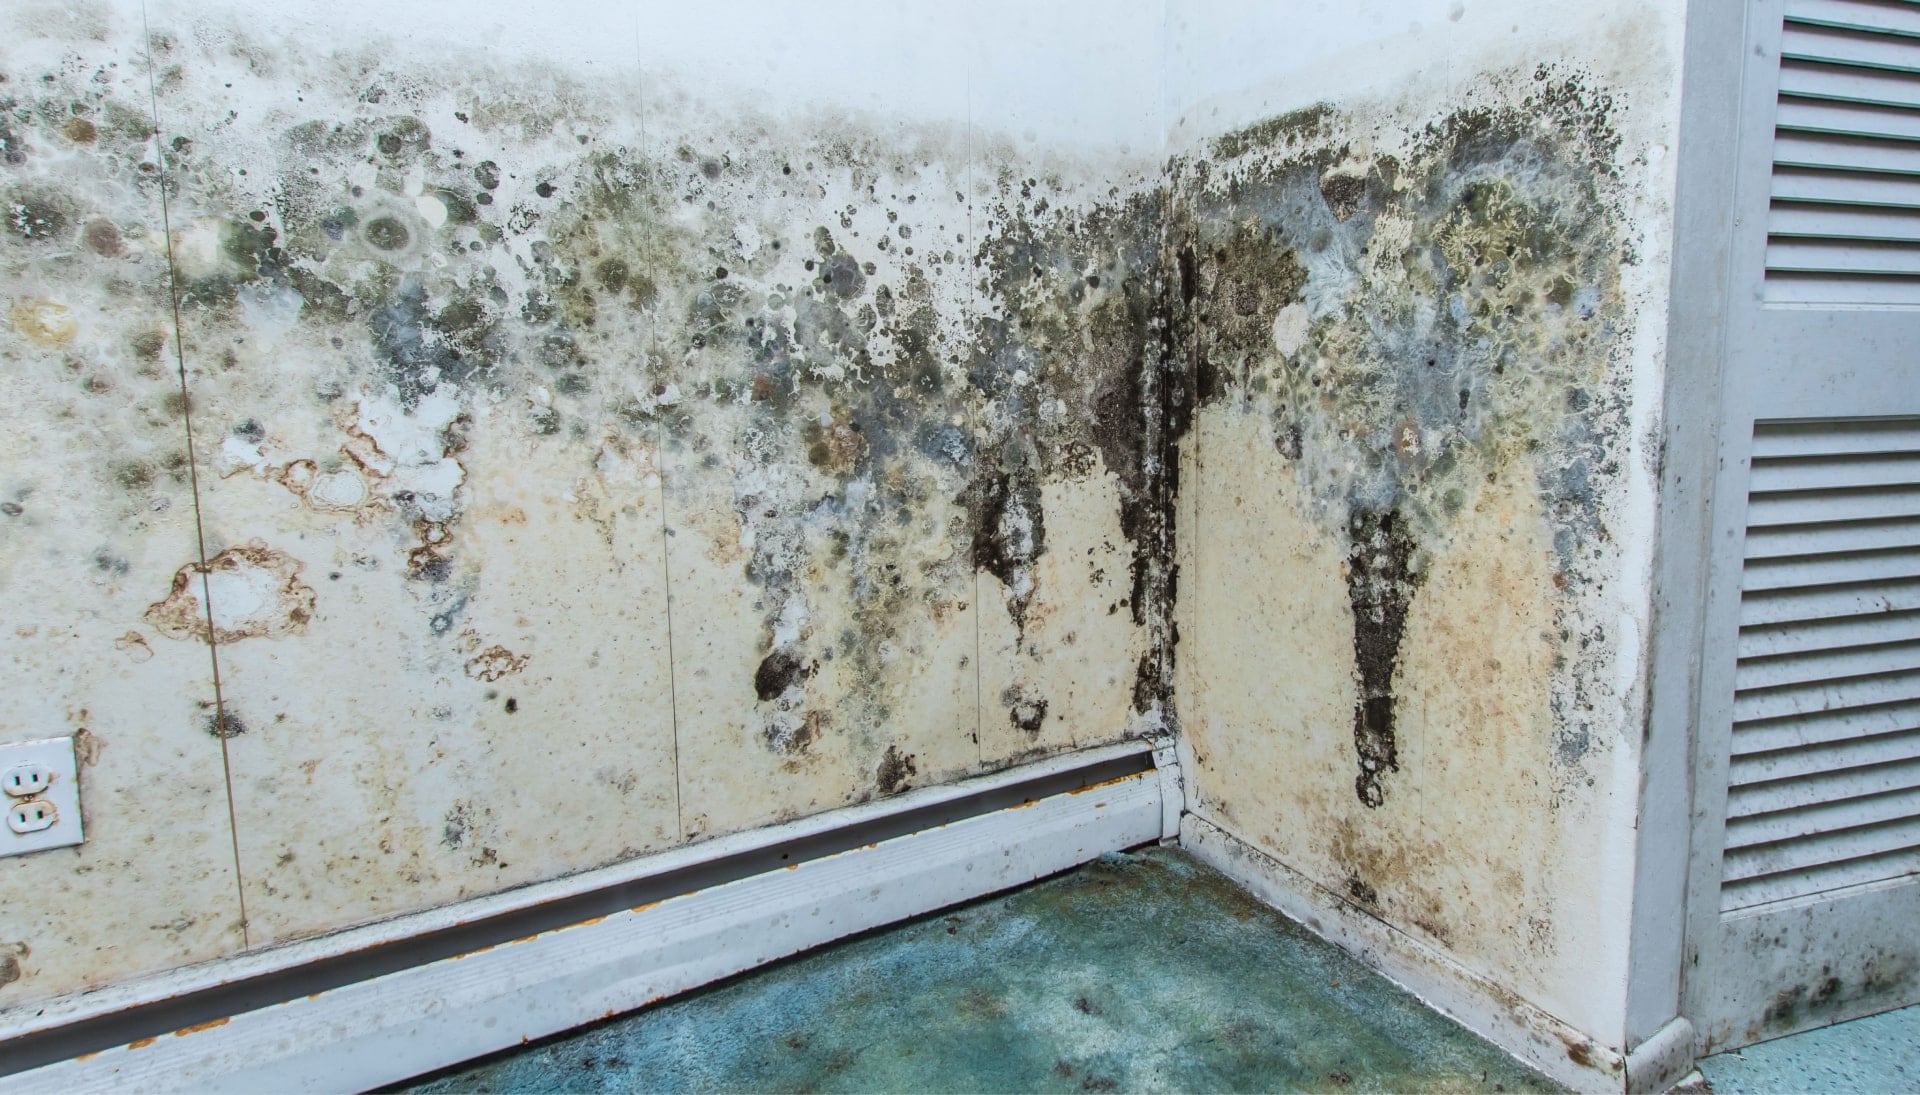 A mold remediation team using specialized techniques to remove mold damage and control odors in a Hopkinsville property, with a focus on safety and efficiency